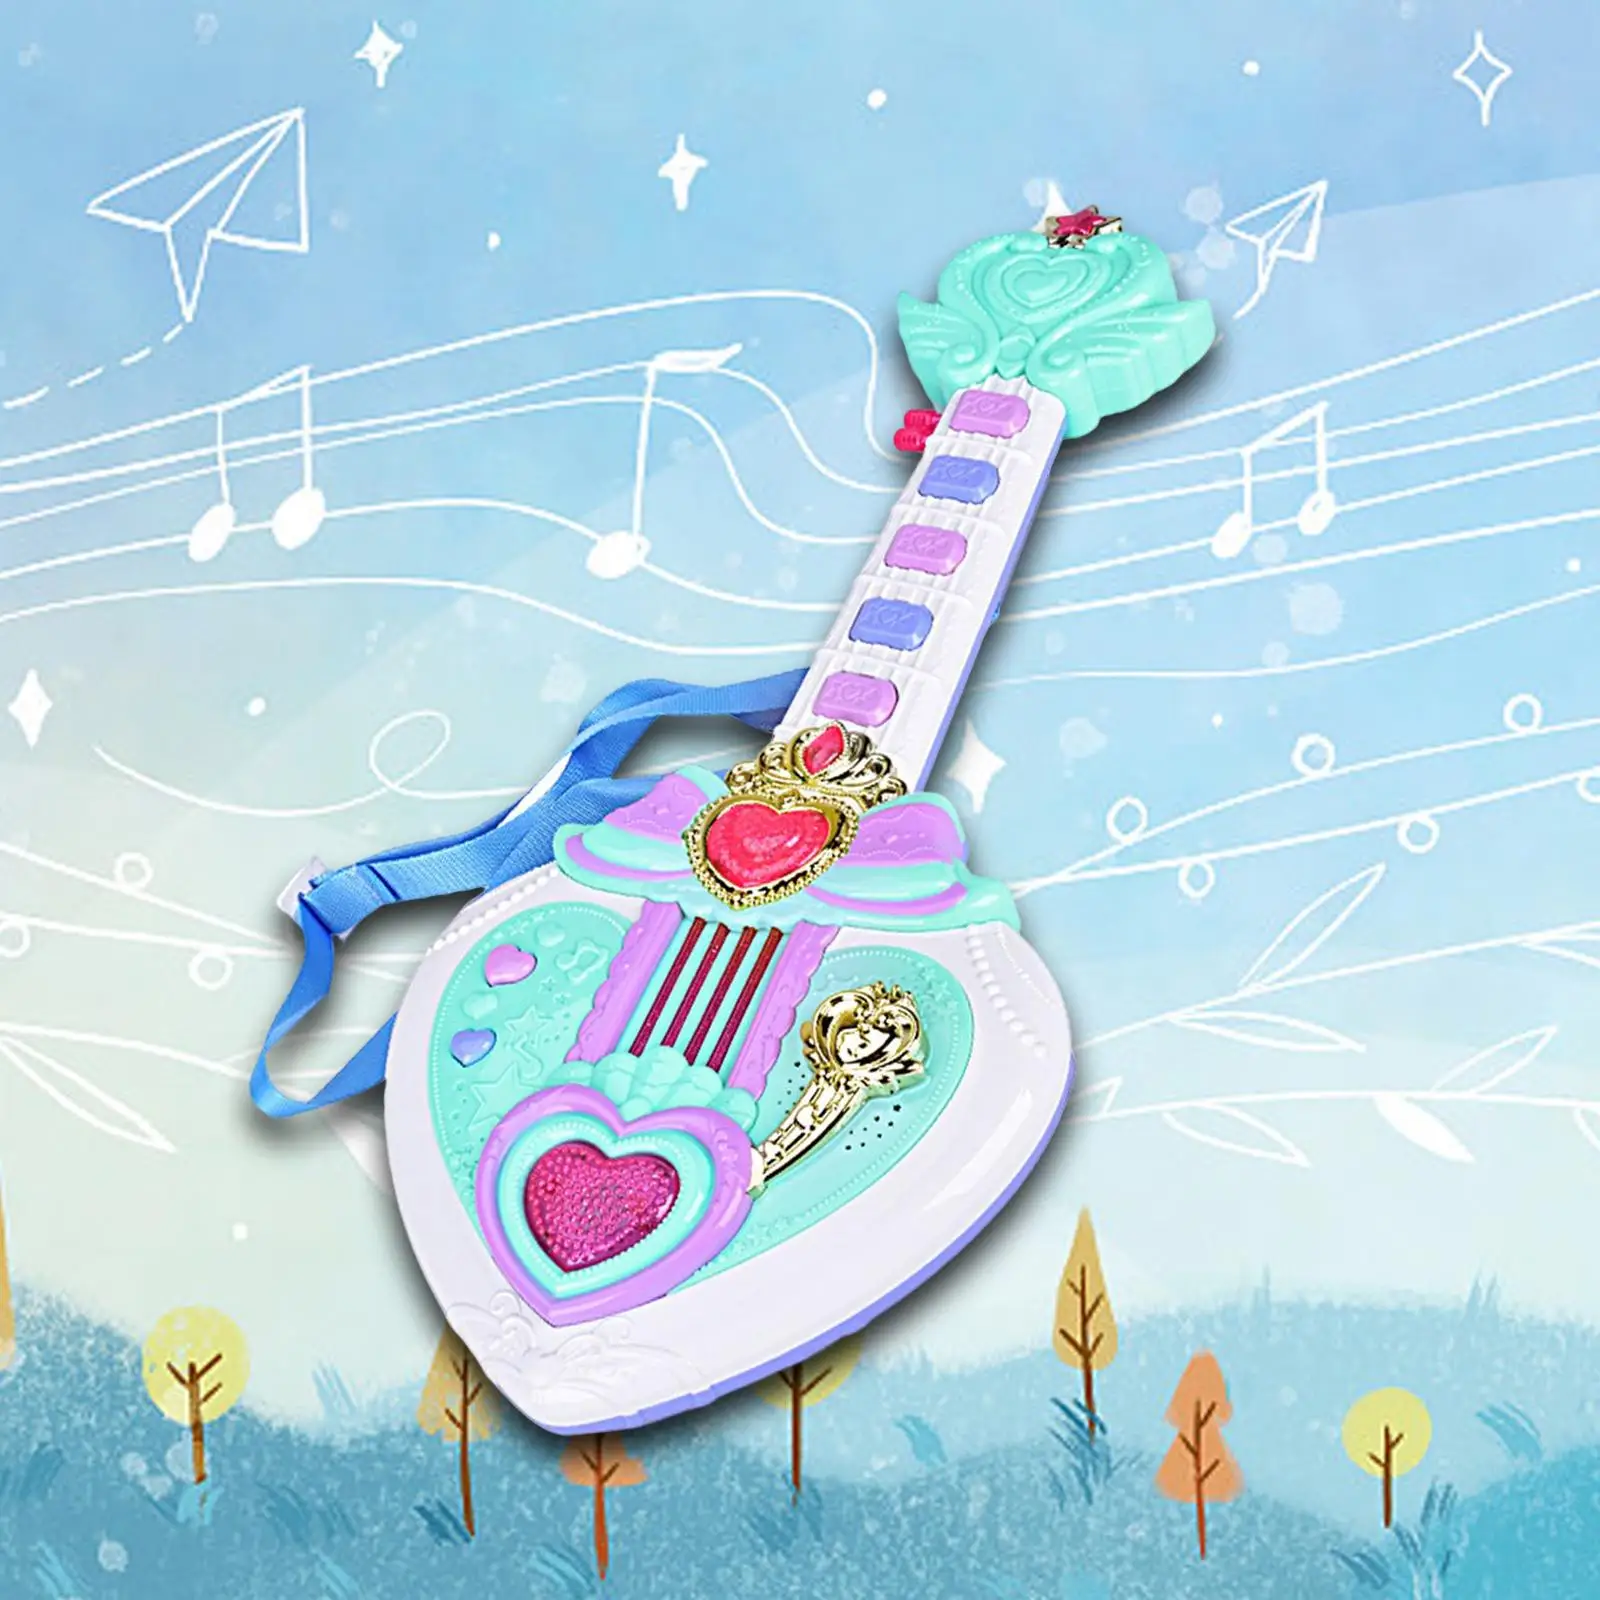 Kids Music Toys with Lights Musical Skill Improving 8 Buttons Electronic Guitar Toy for Toddler Baby Preschool Holiday Gifts